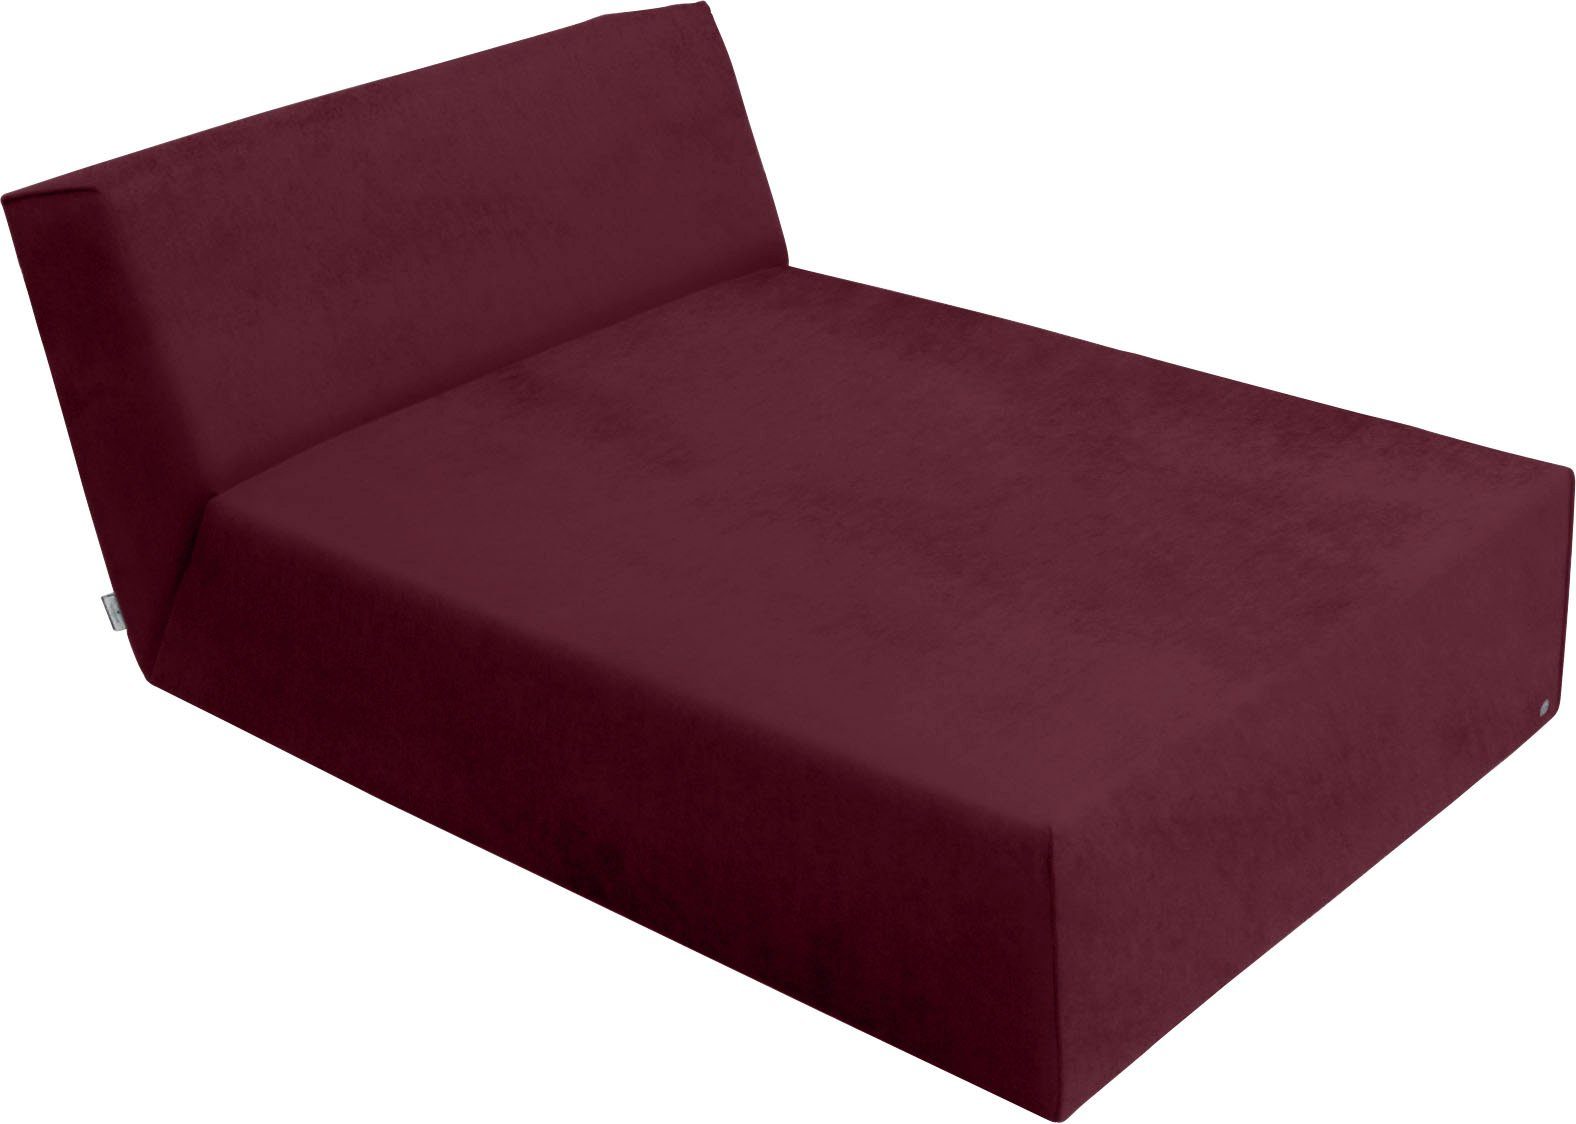 TOM Sofaelement ELEMENTS, wahlweise Chaiselongue HOME Bettfunktion TAILOR mit